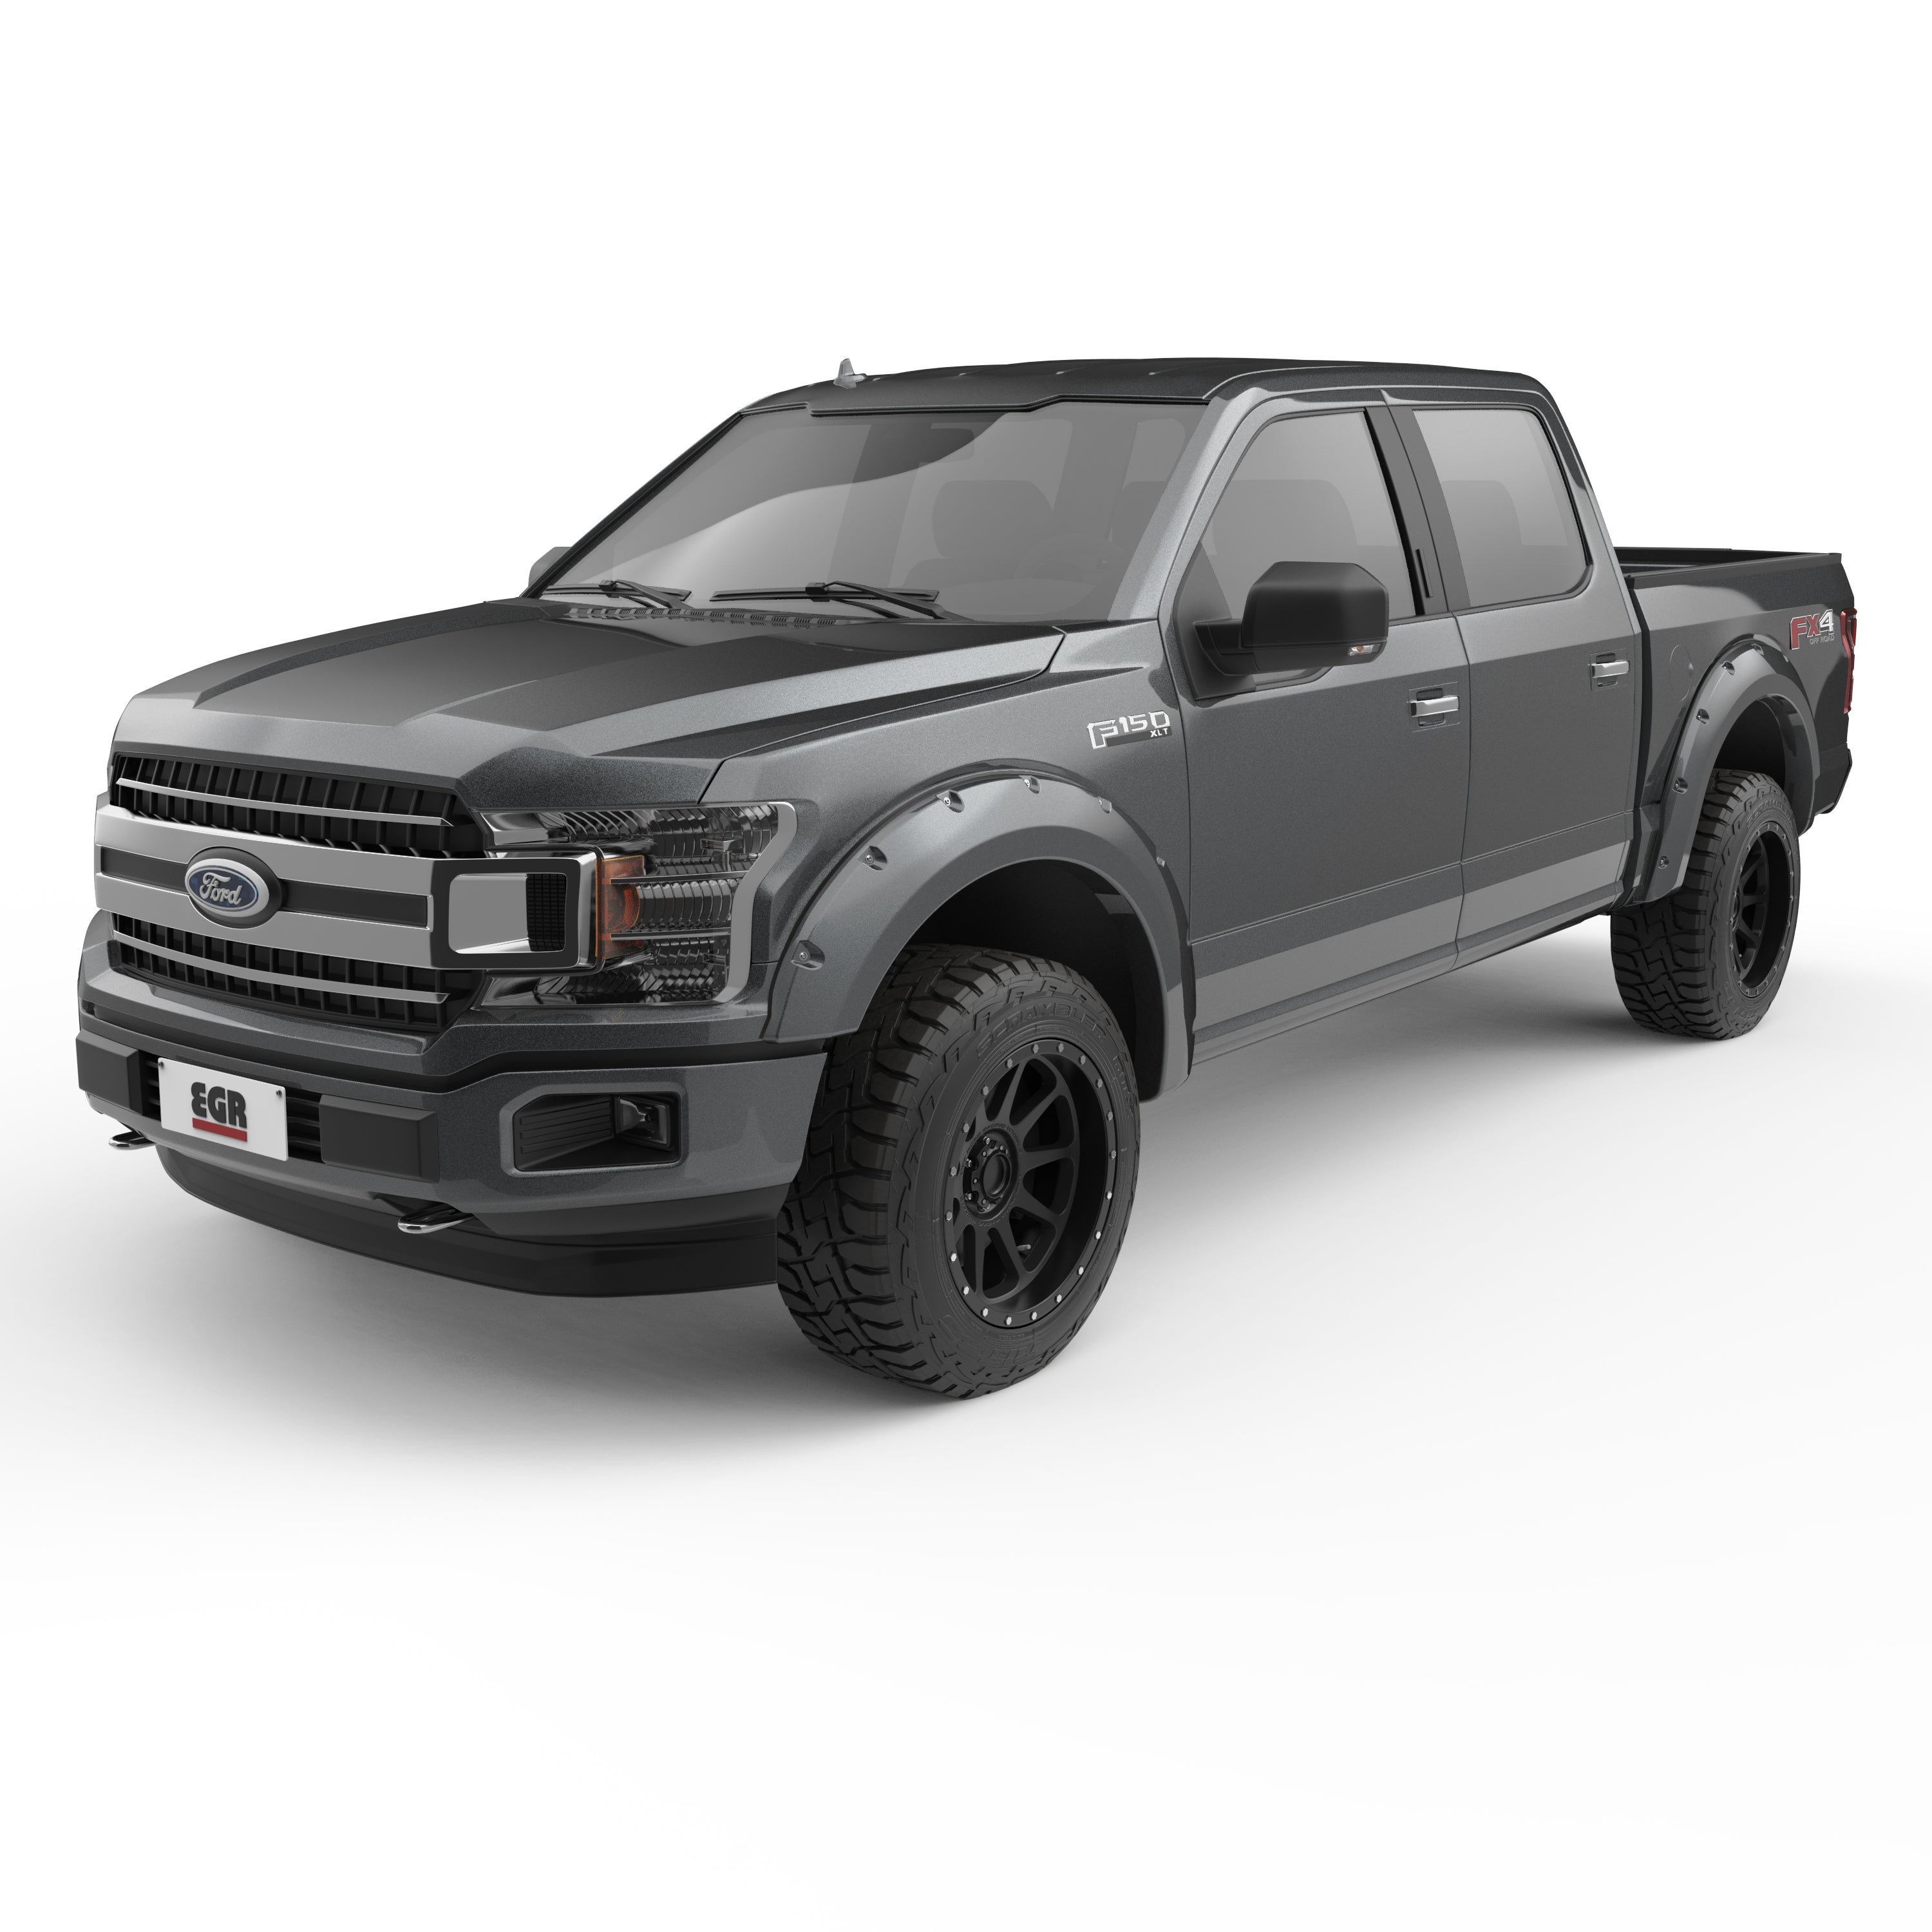 EGR 2018-2020 Ford F-150 2 & 4 Door Crew Cab Standard Cab Extended Cab Pickup Traditional Bolt-on look Fender Flares set of 4 Painted to Code Magnetic 793574-J7